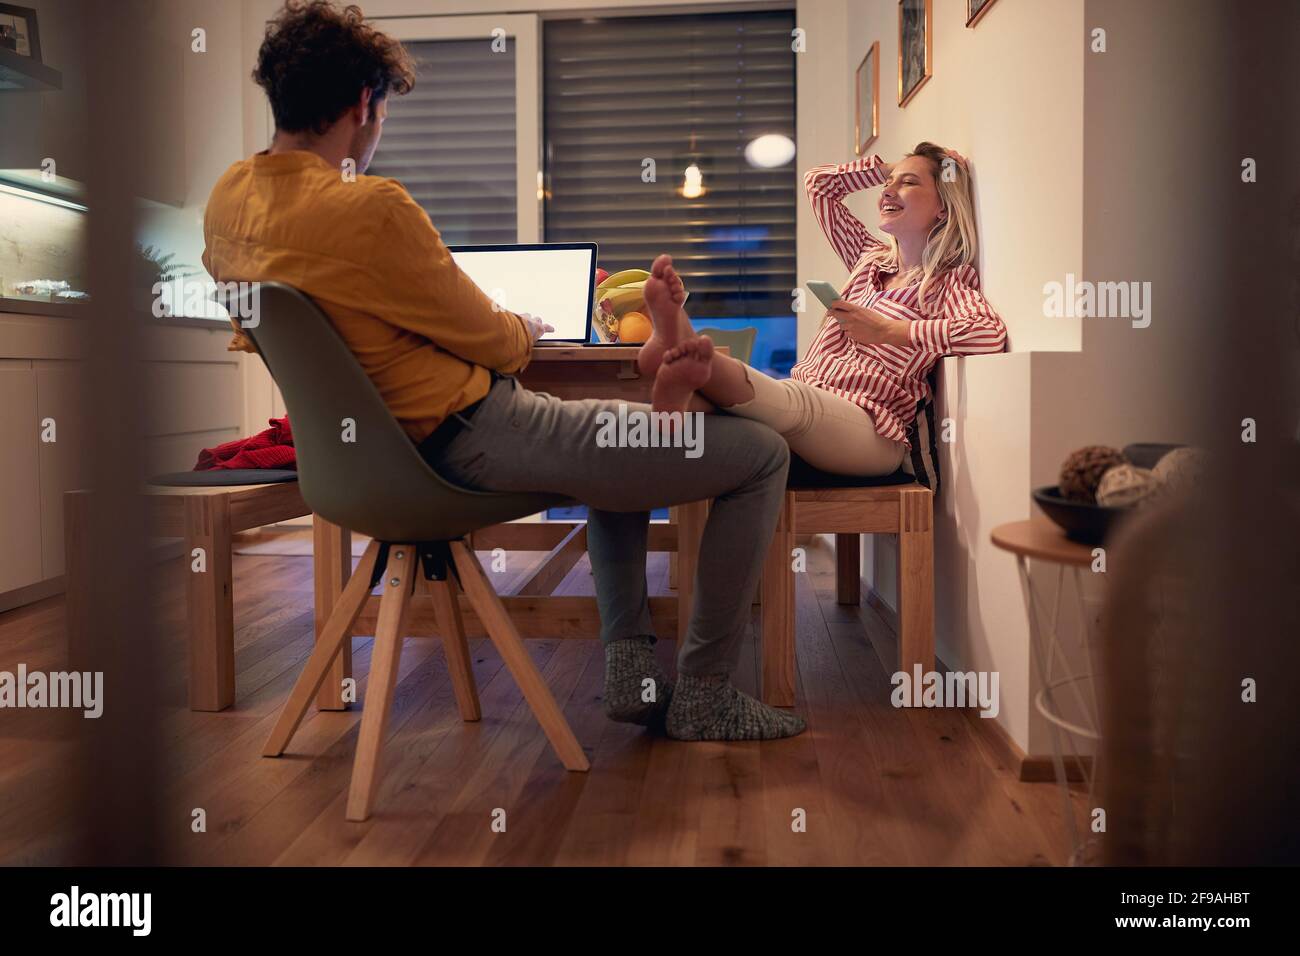 young couple enjoying together, working from home, spending valentine in isolation. Valentine during covid lockdown concept Stock Photo